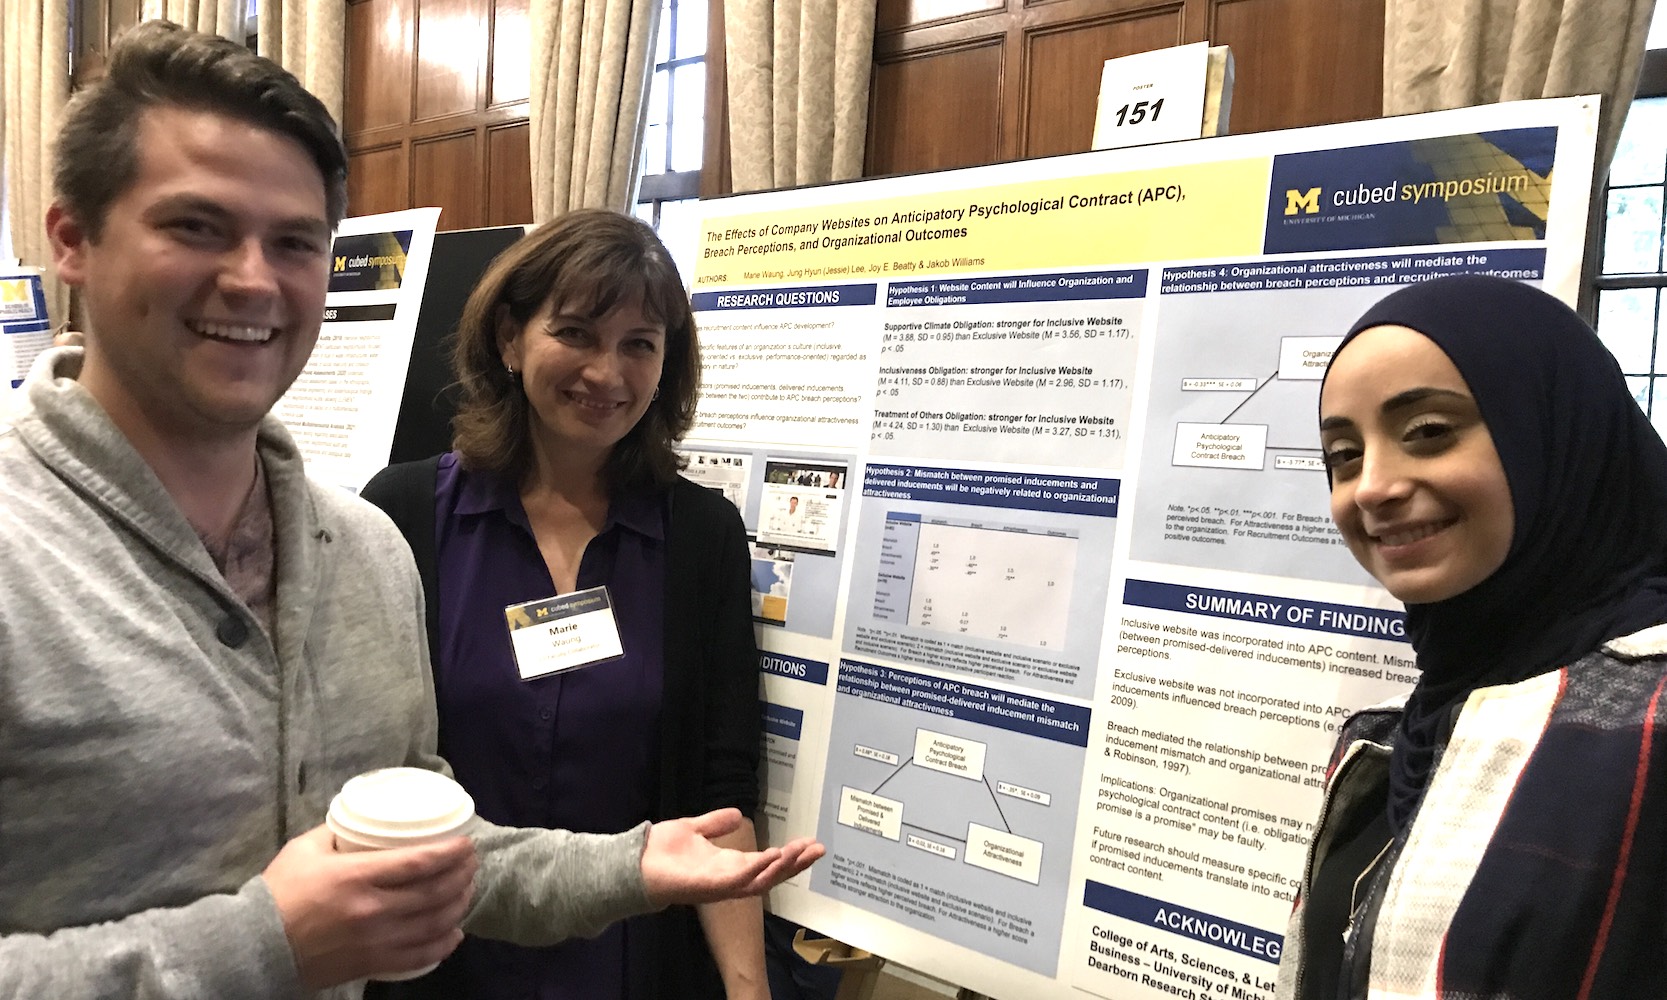 Graduate student Jakob Williams assisted with an MCubed research study and presented research findings.